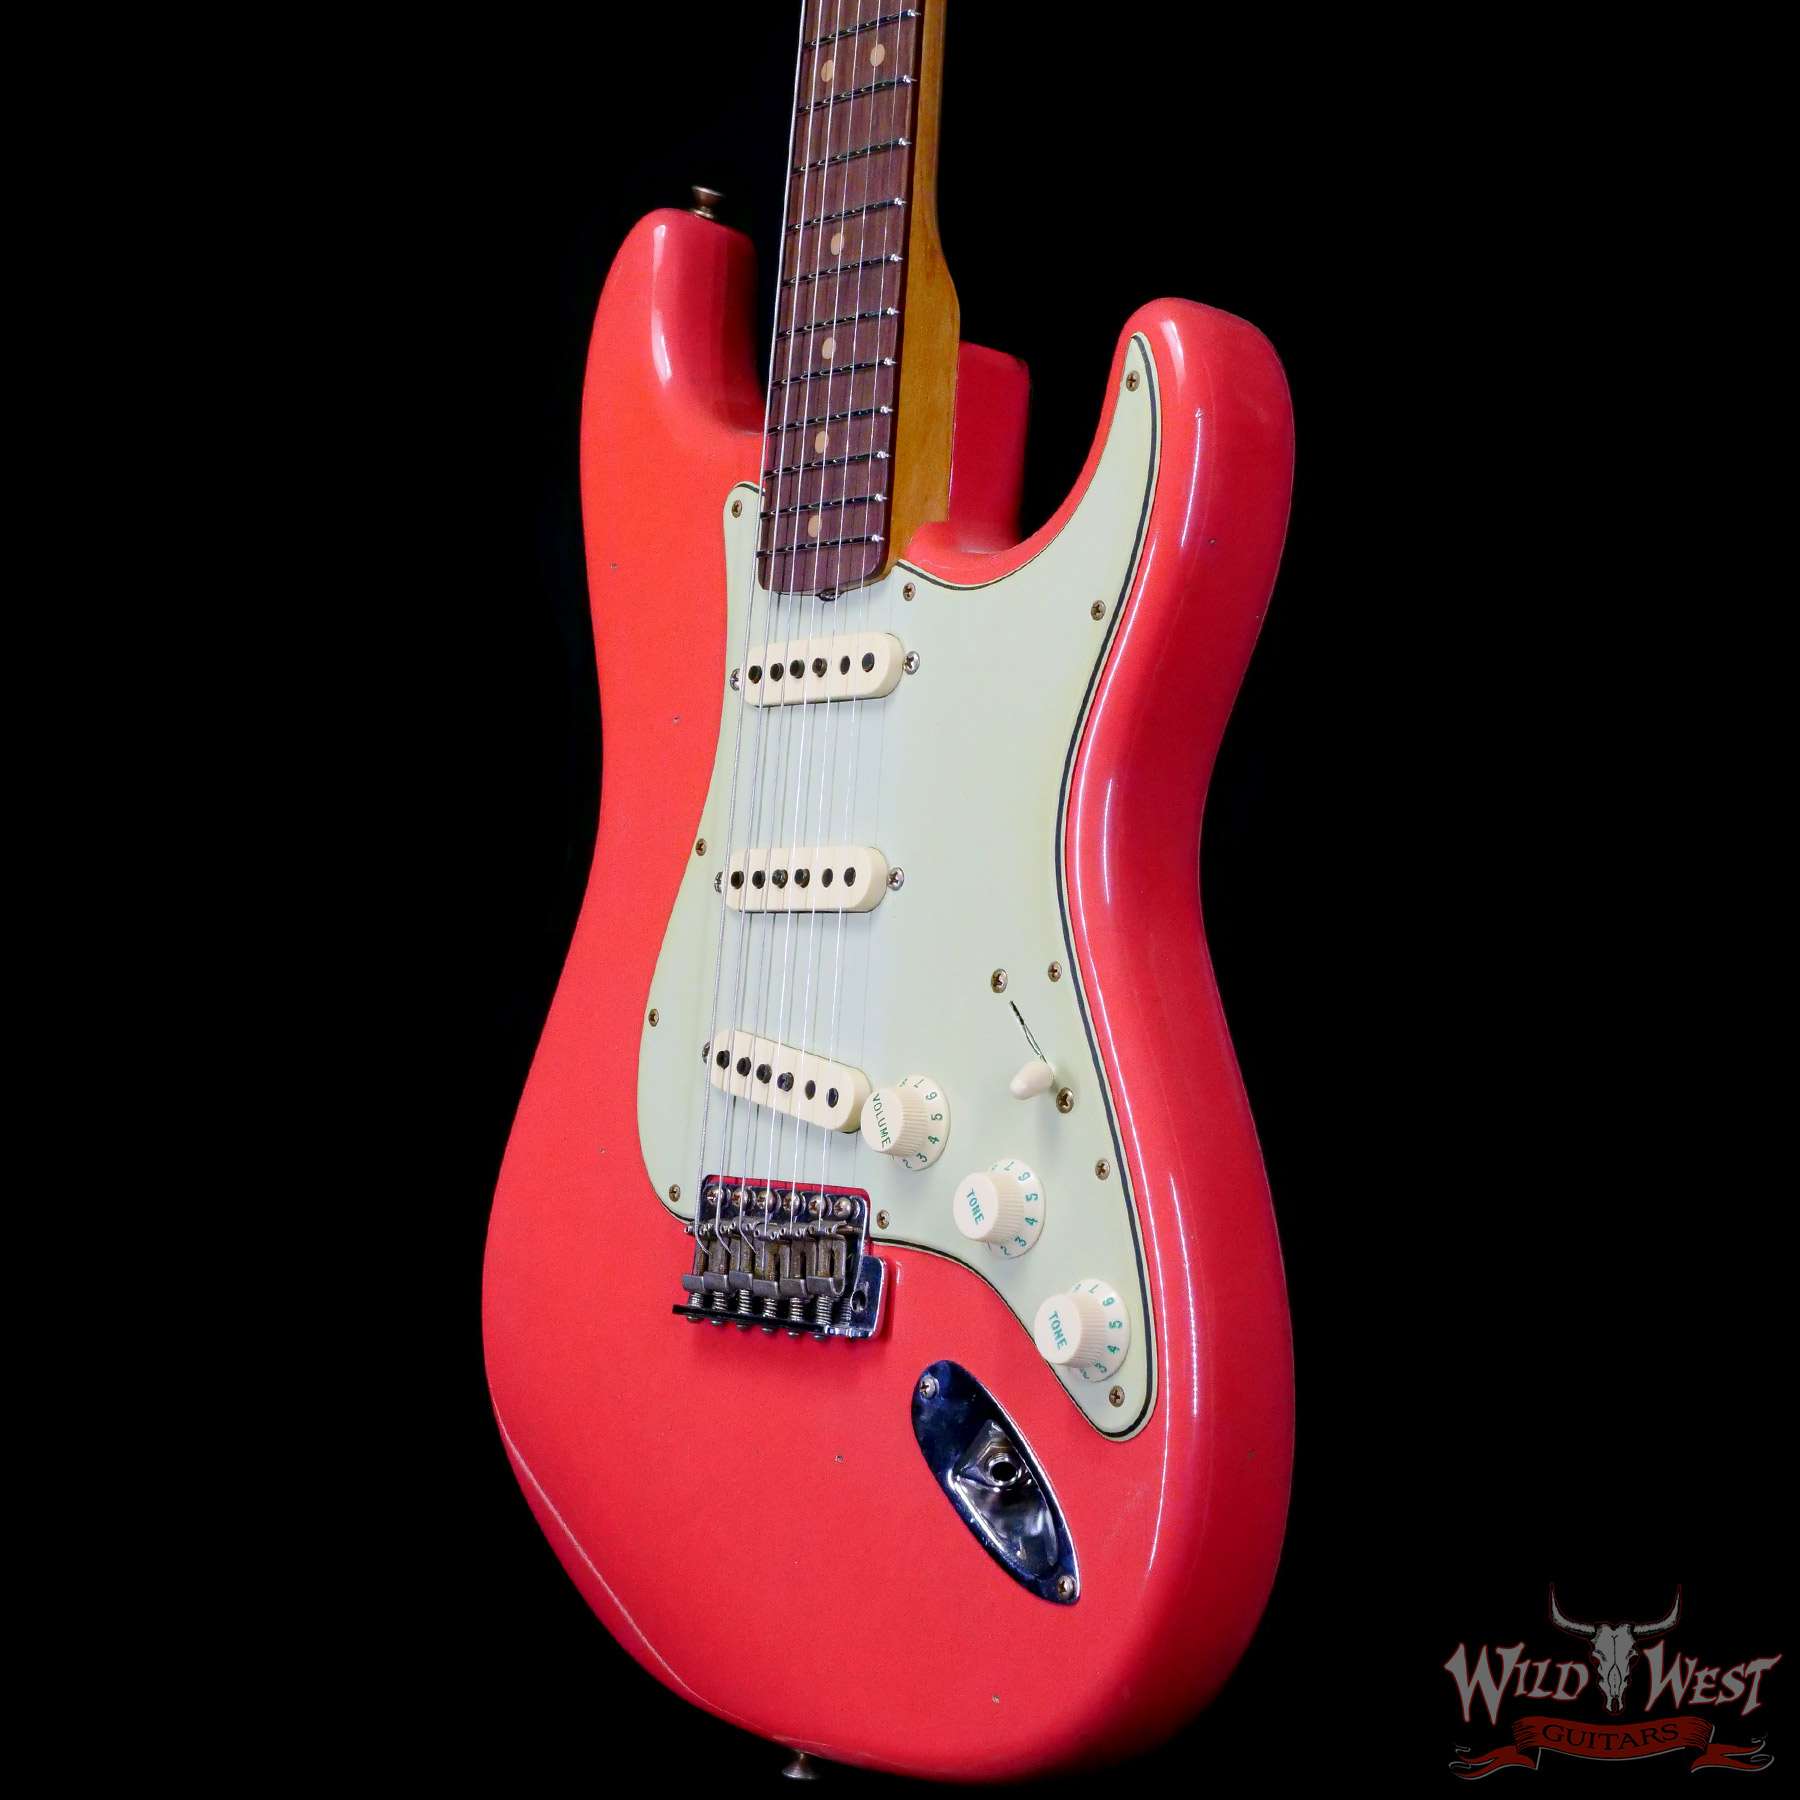 Custom Shop 1964 Stratocaster Journeyman Relic Faded Aged Fiesta Red 7.65 LBS West Guitars